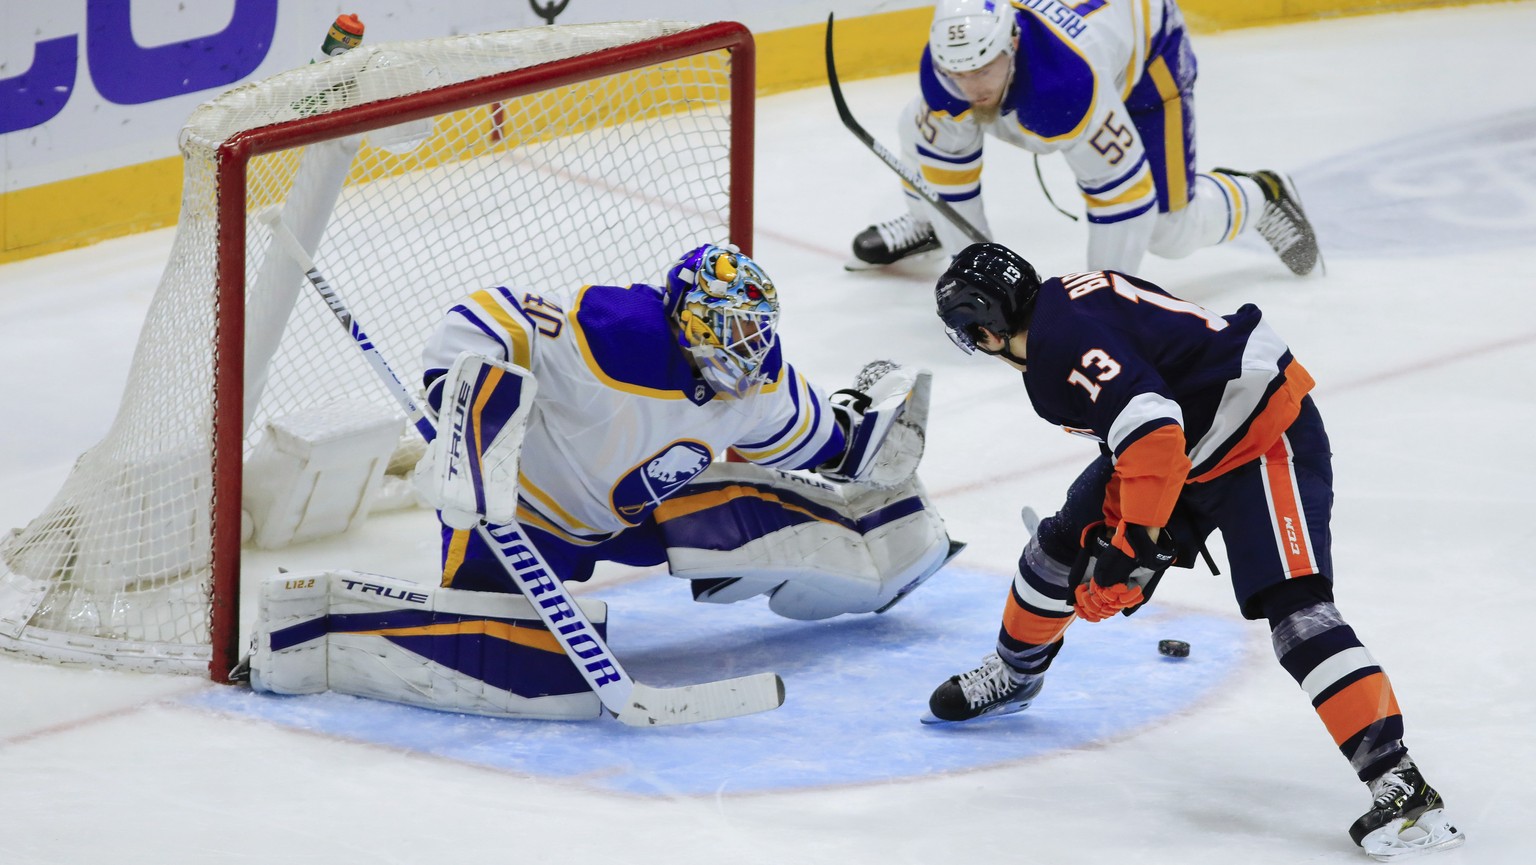 New York Islanders&#039; Mathew Barzal scores past Buffalo Sabres goaltender Carter Hutton in the second period of an NHL hockey game Saturday, March 6, 2021, in Uniondale, NY. (AP Photo/Kevin Hagen).